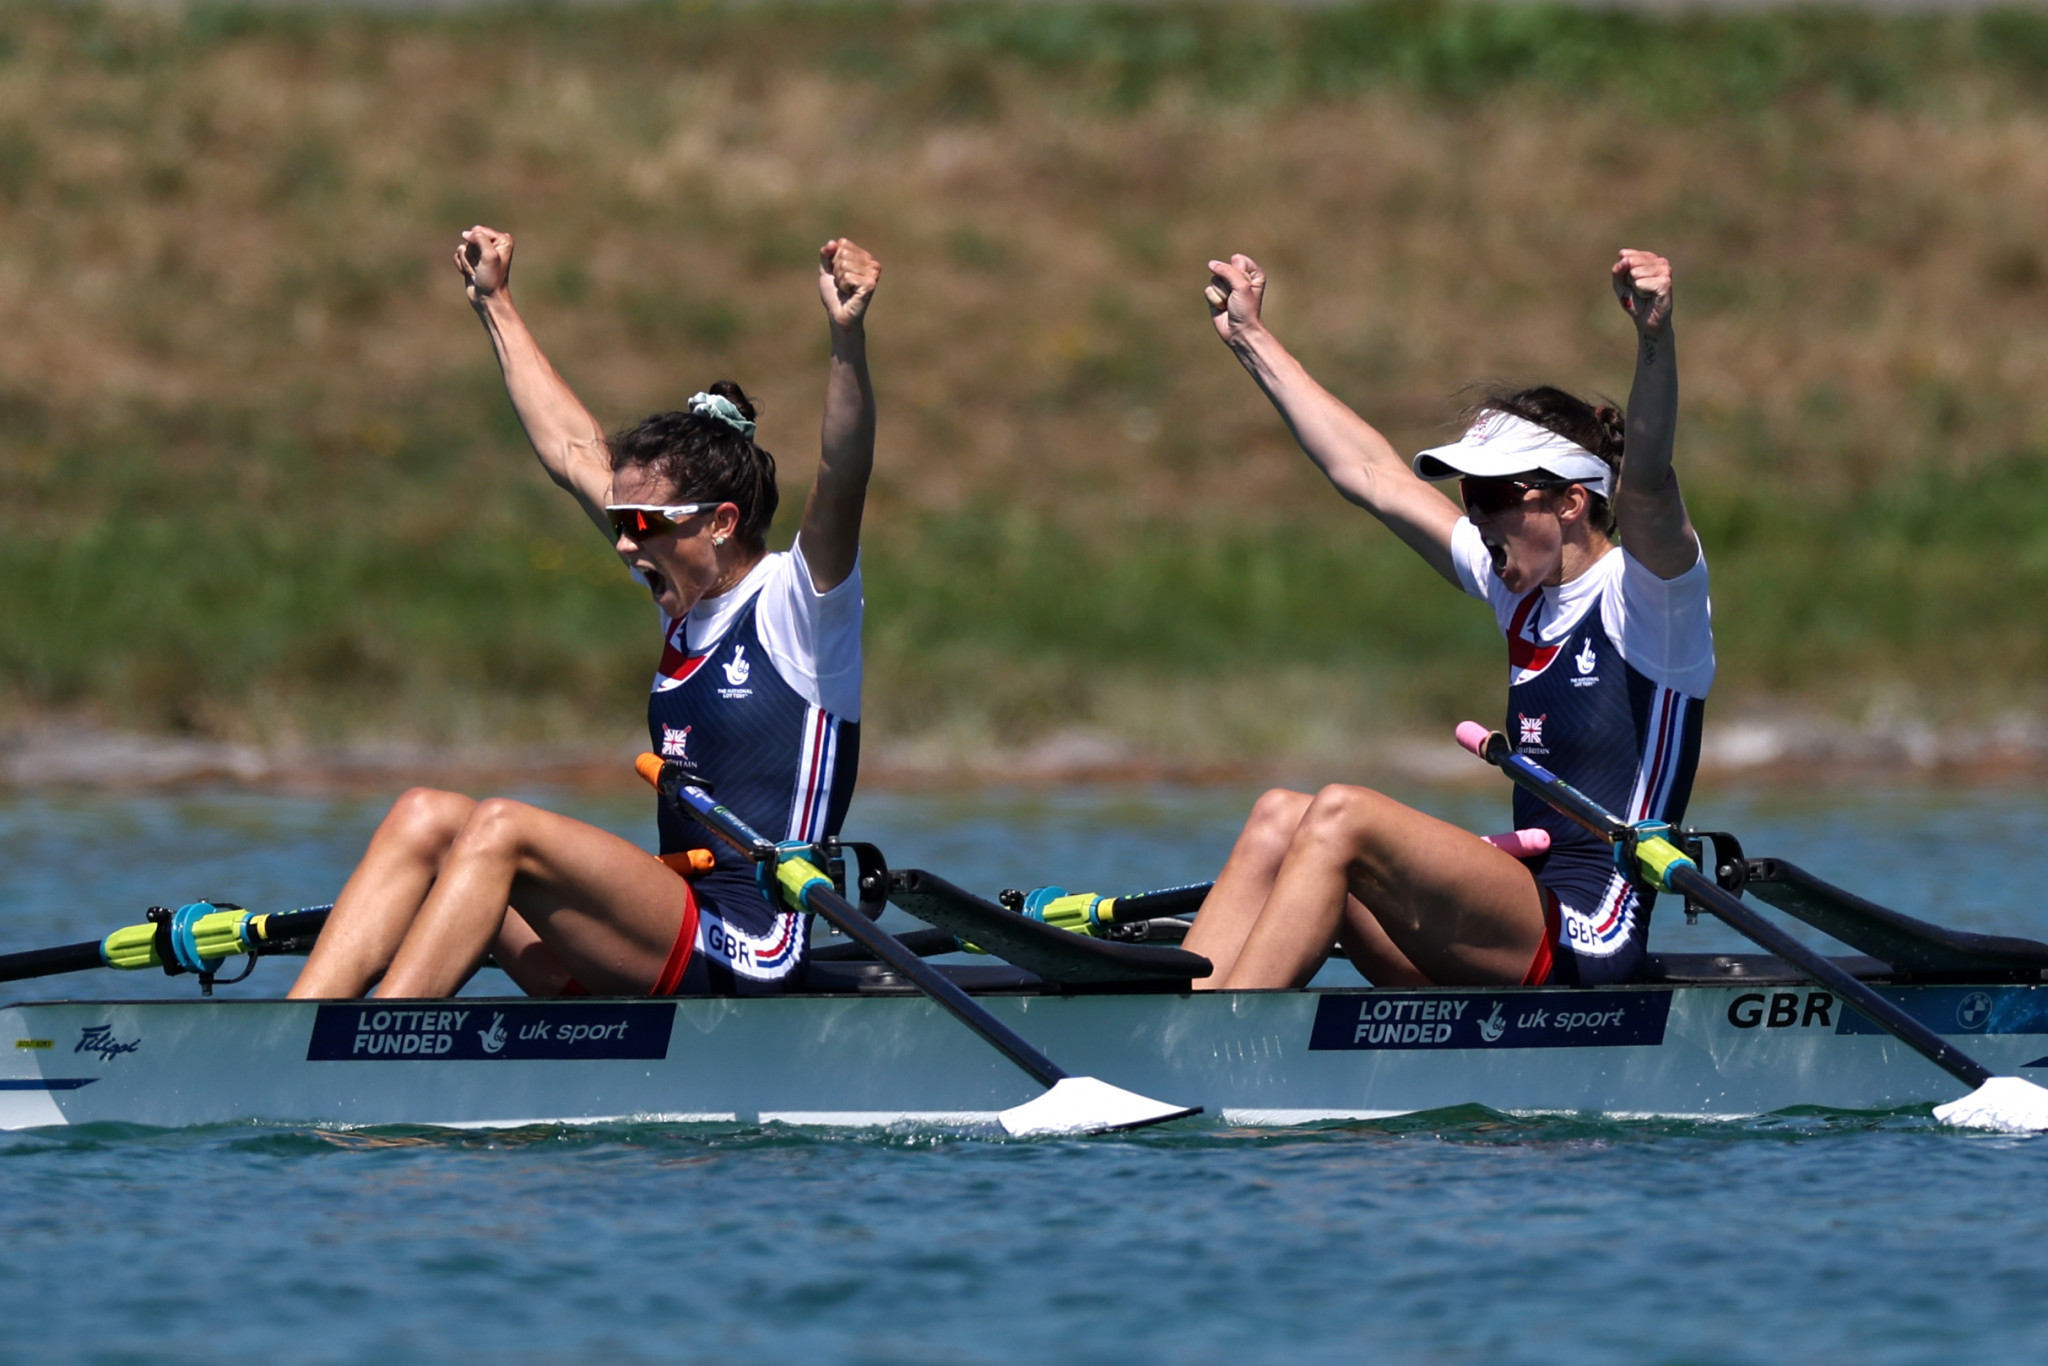 European champions Craig and Grant lead Britain to formidable day at World Rowing Championships